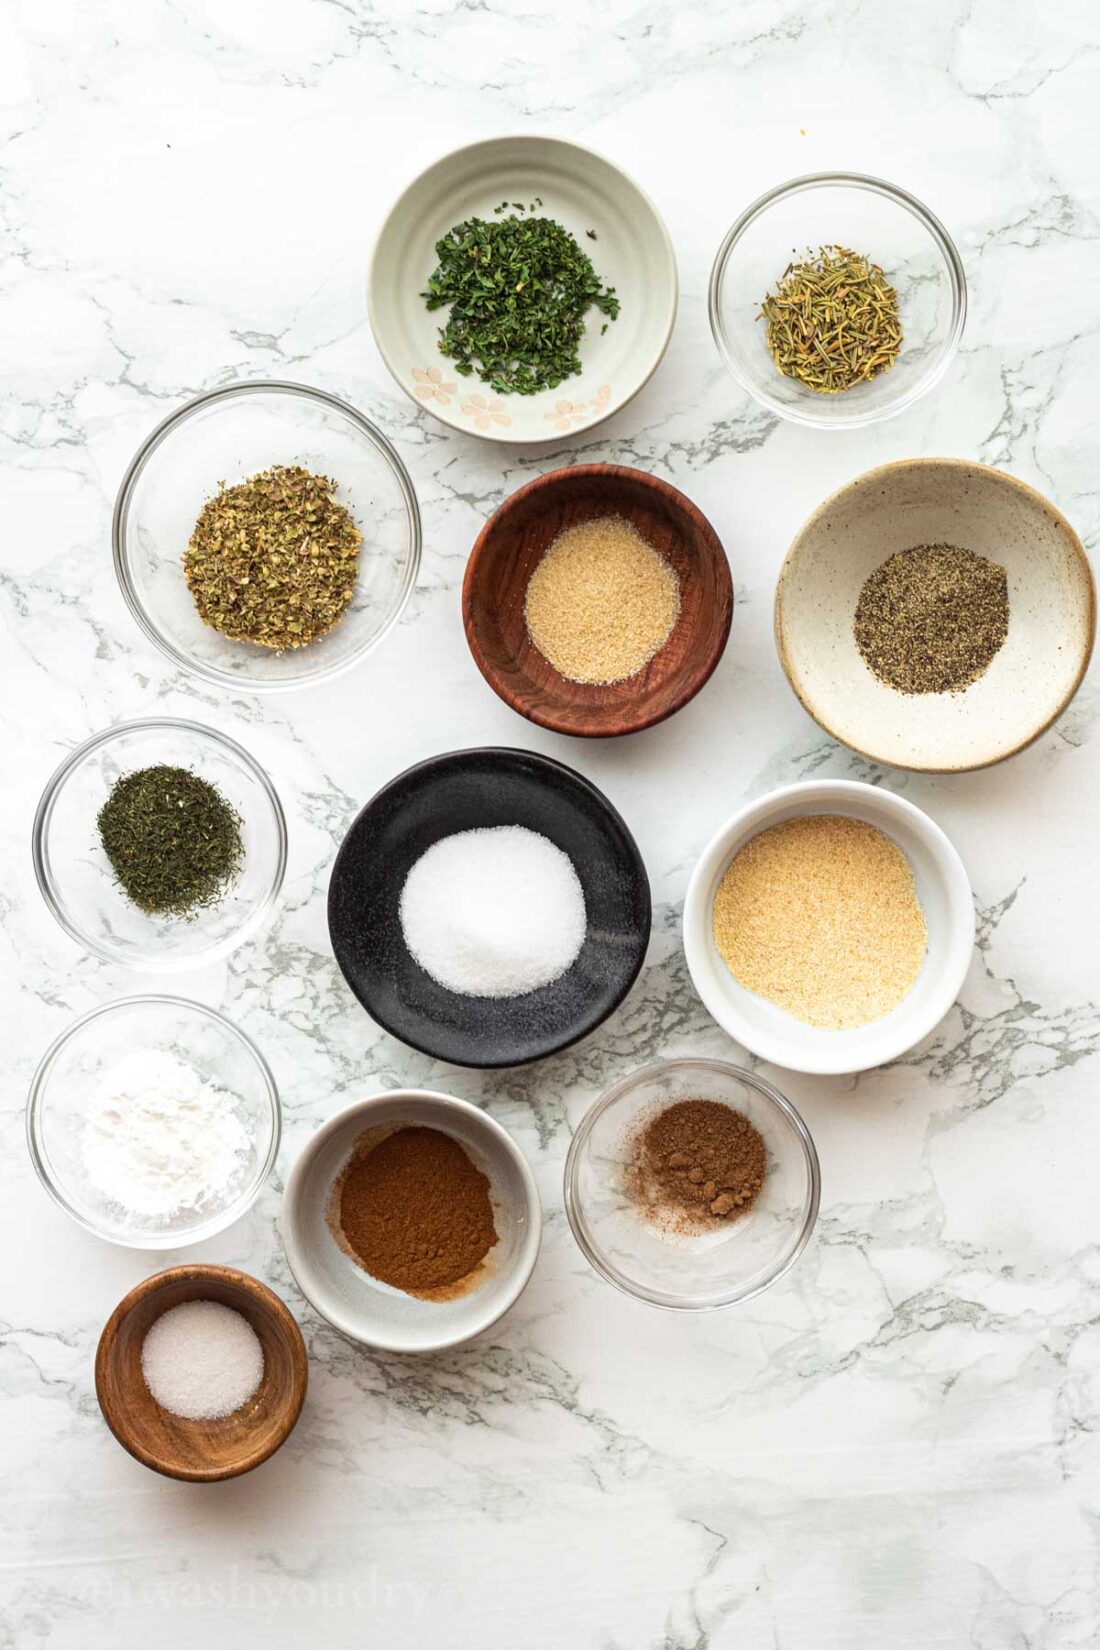 12 spices in glass bowls on marble countertop. 